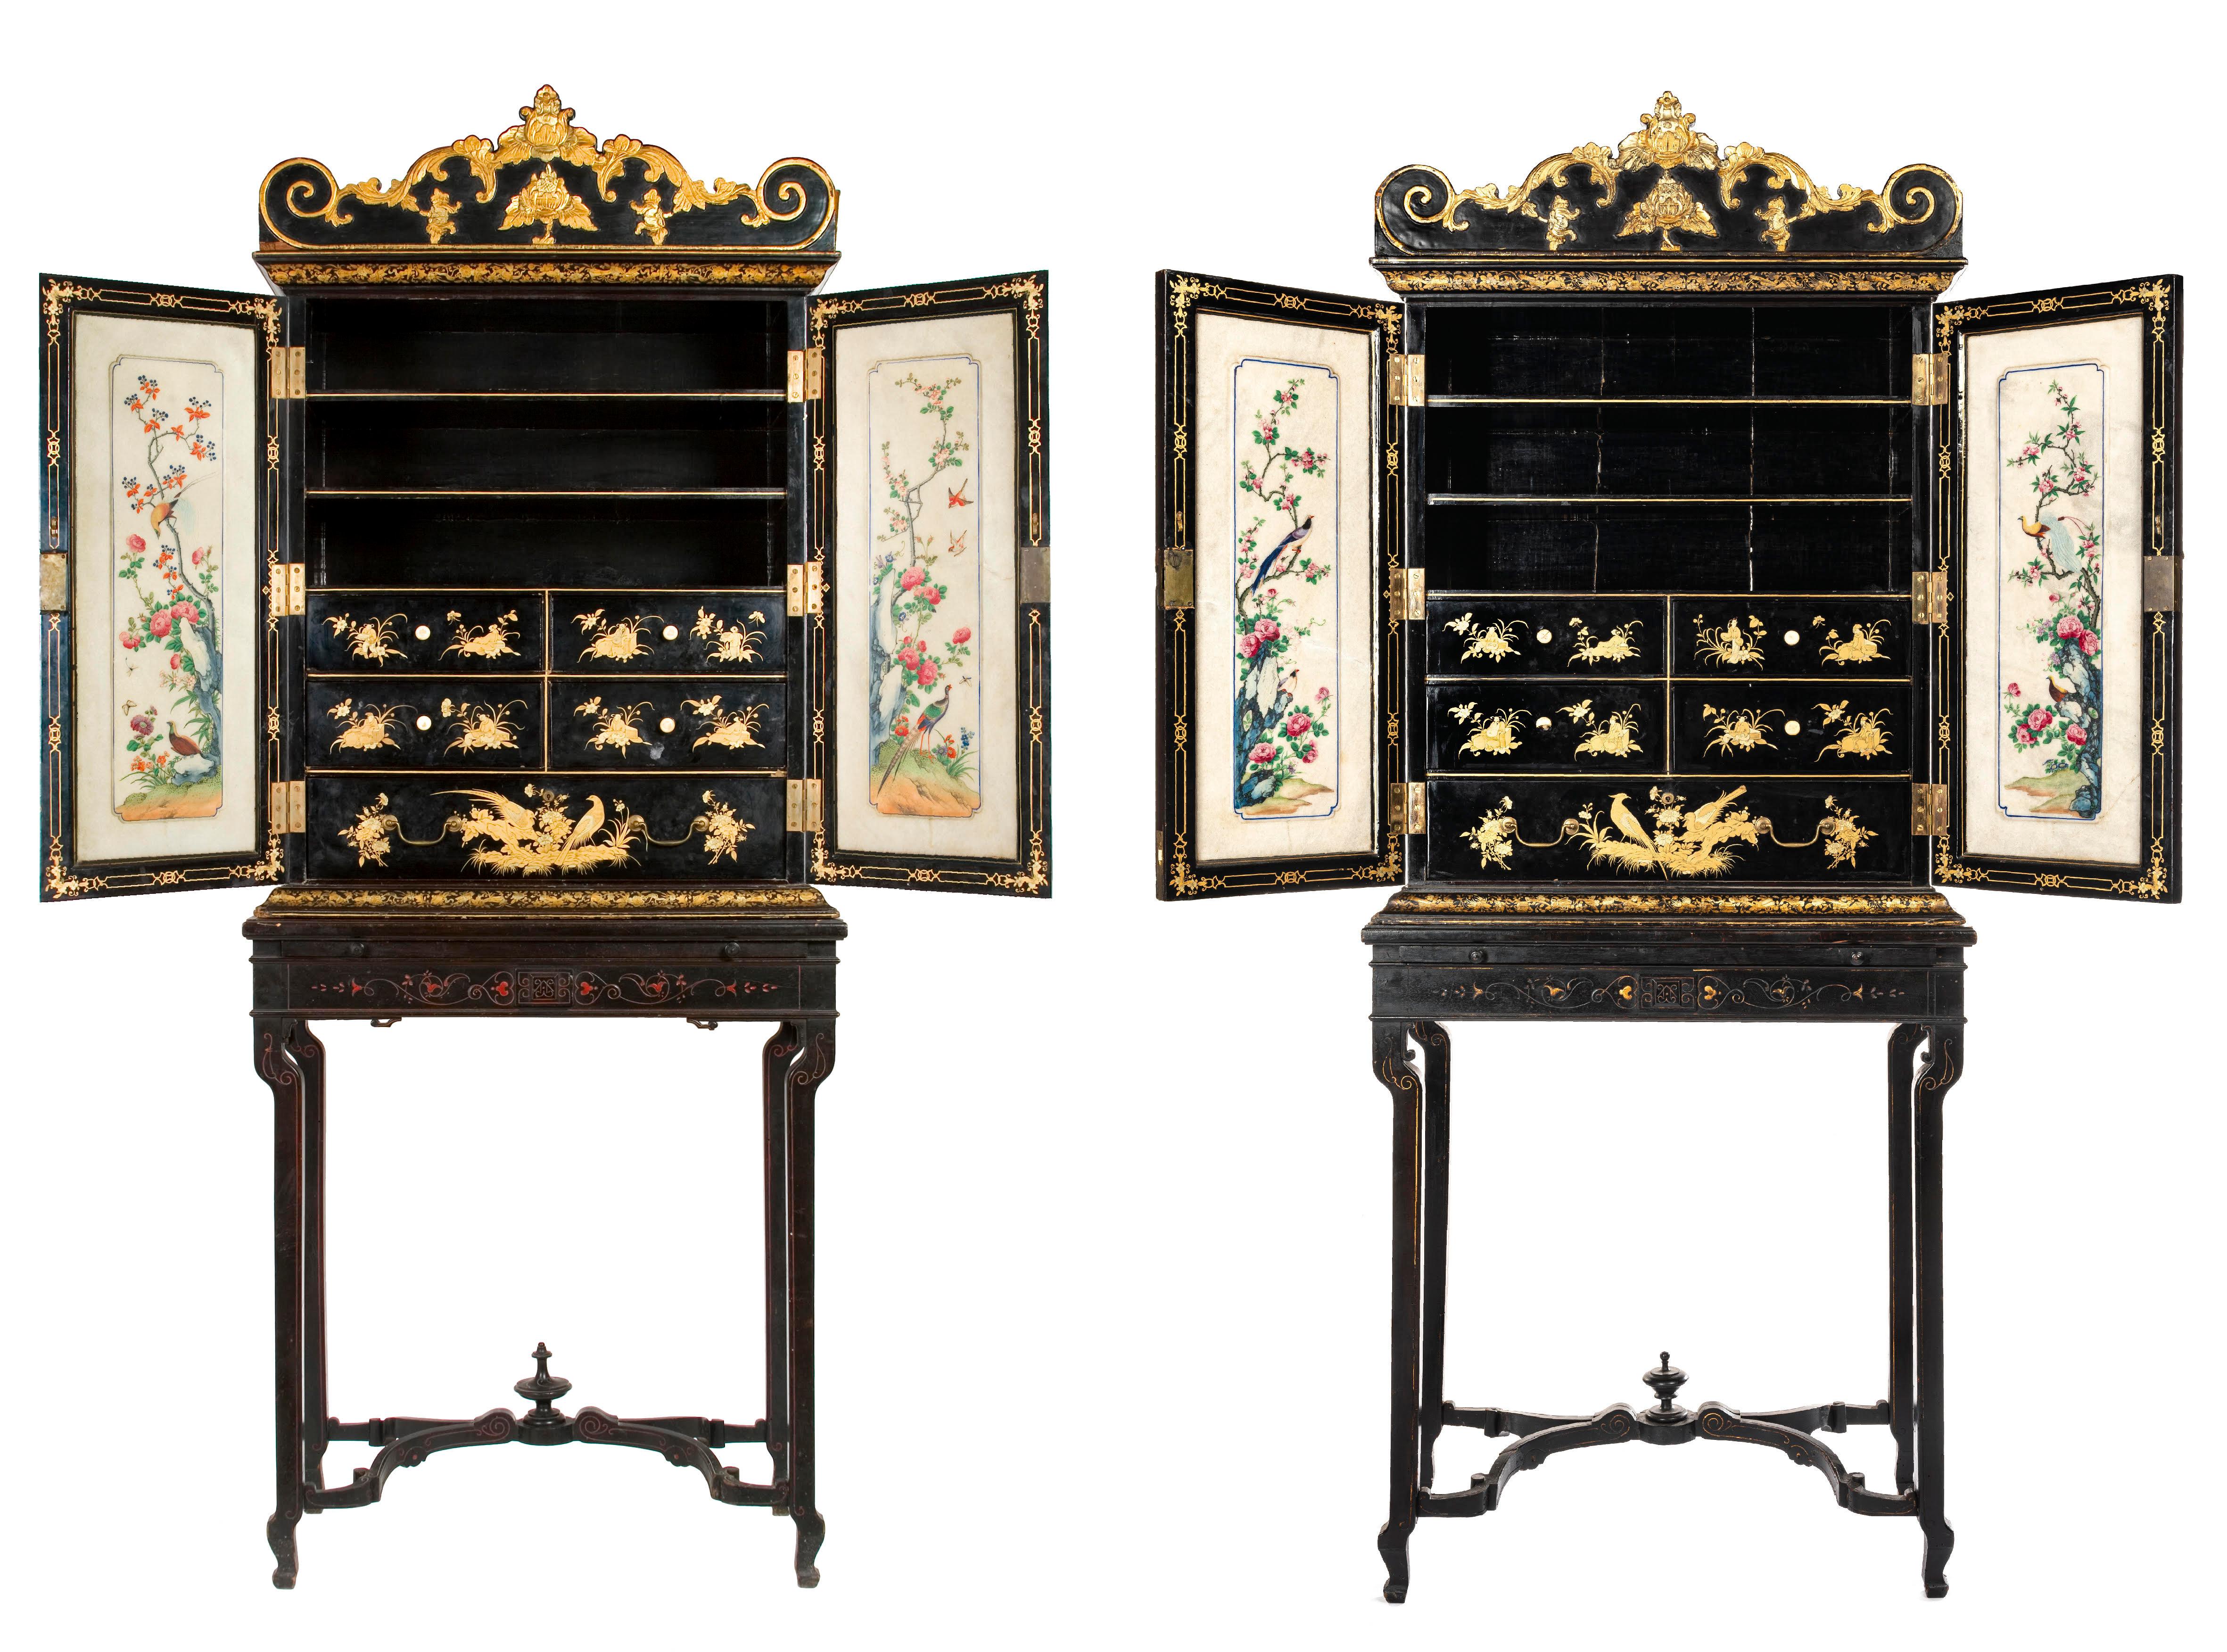 Stunning quality pair of Chinese export canton black lacquer desk cabinet
China, circa 1830
The stand European, circa 1900
Overall, Height: 202 cm - Cabinet: 88-77-37 cm
Provenance: French private collection


Main feature is the rare alabaster